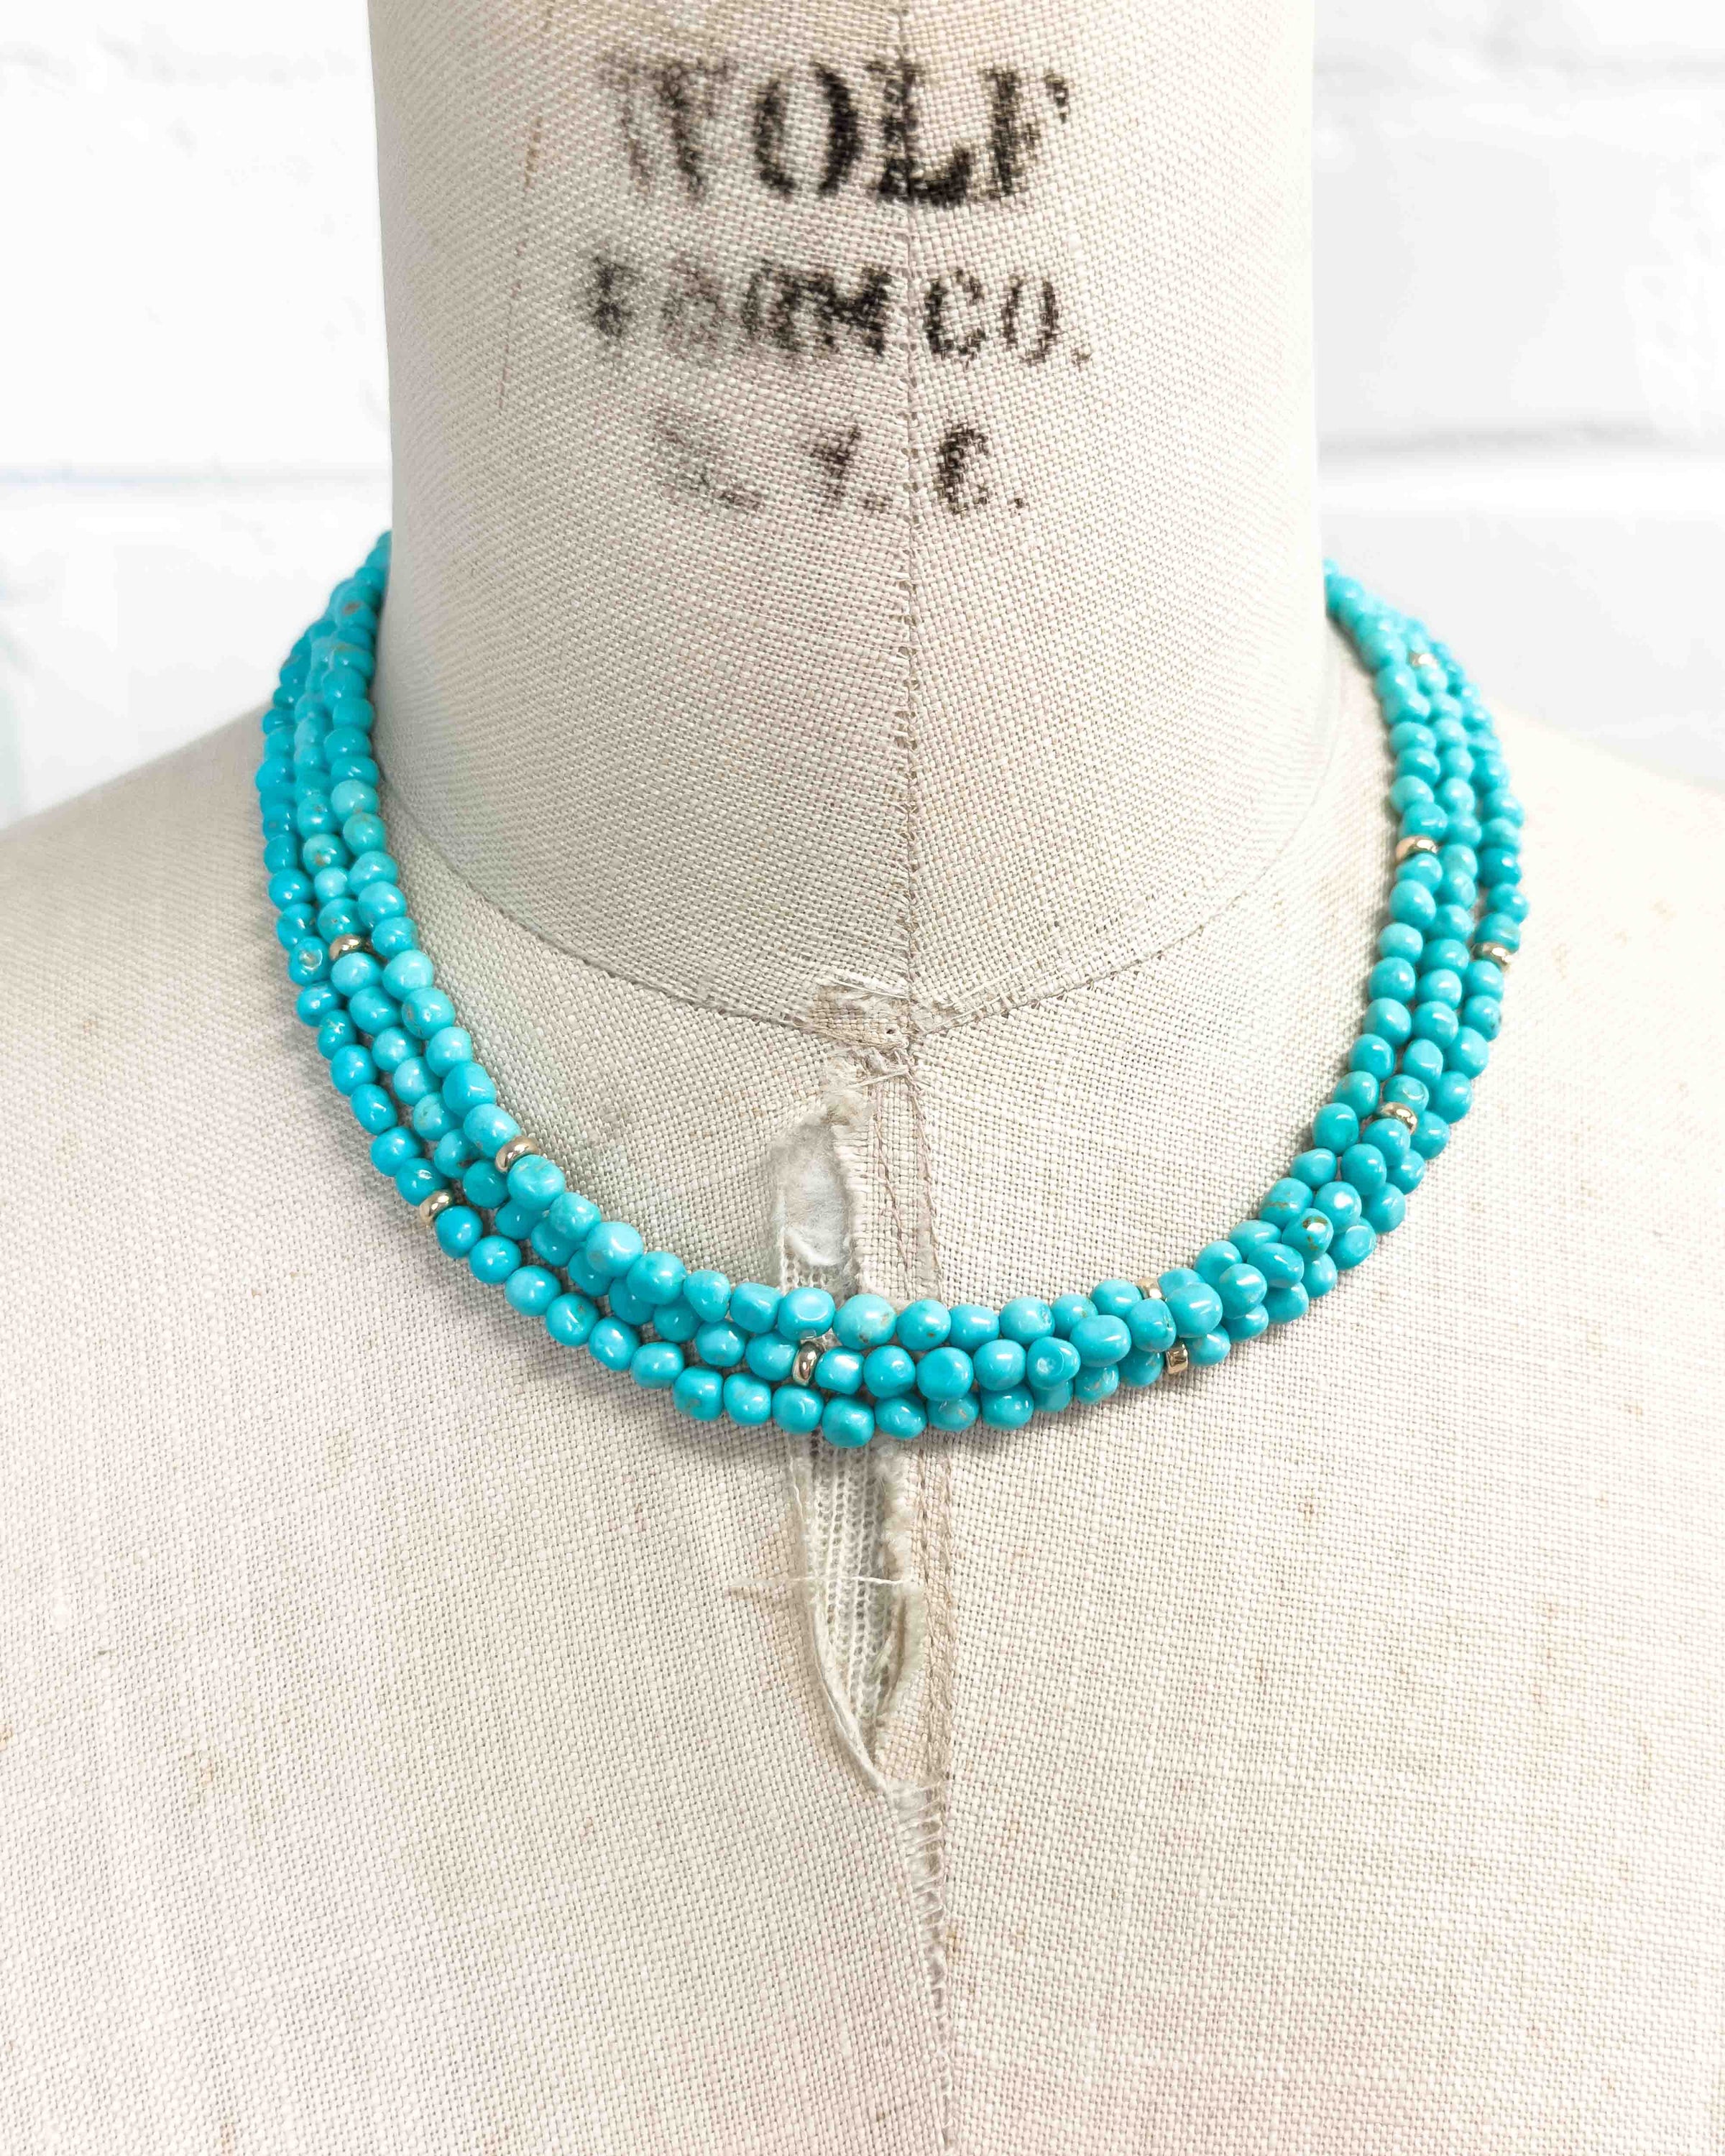 14k Natural Un-Dyed Sleeping Beauty Turquoise Triple Strand Necklace